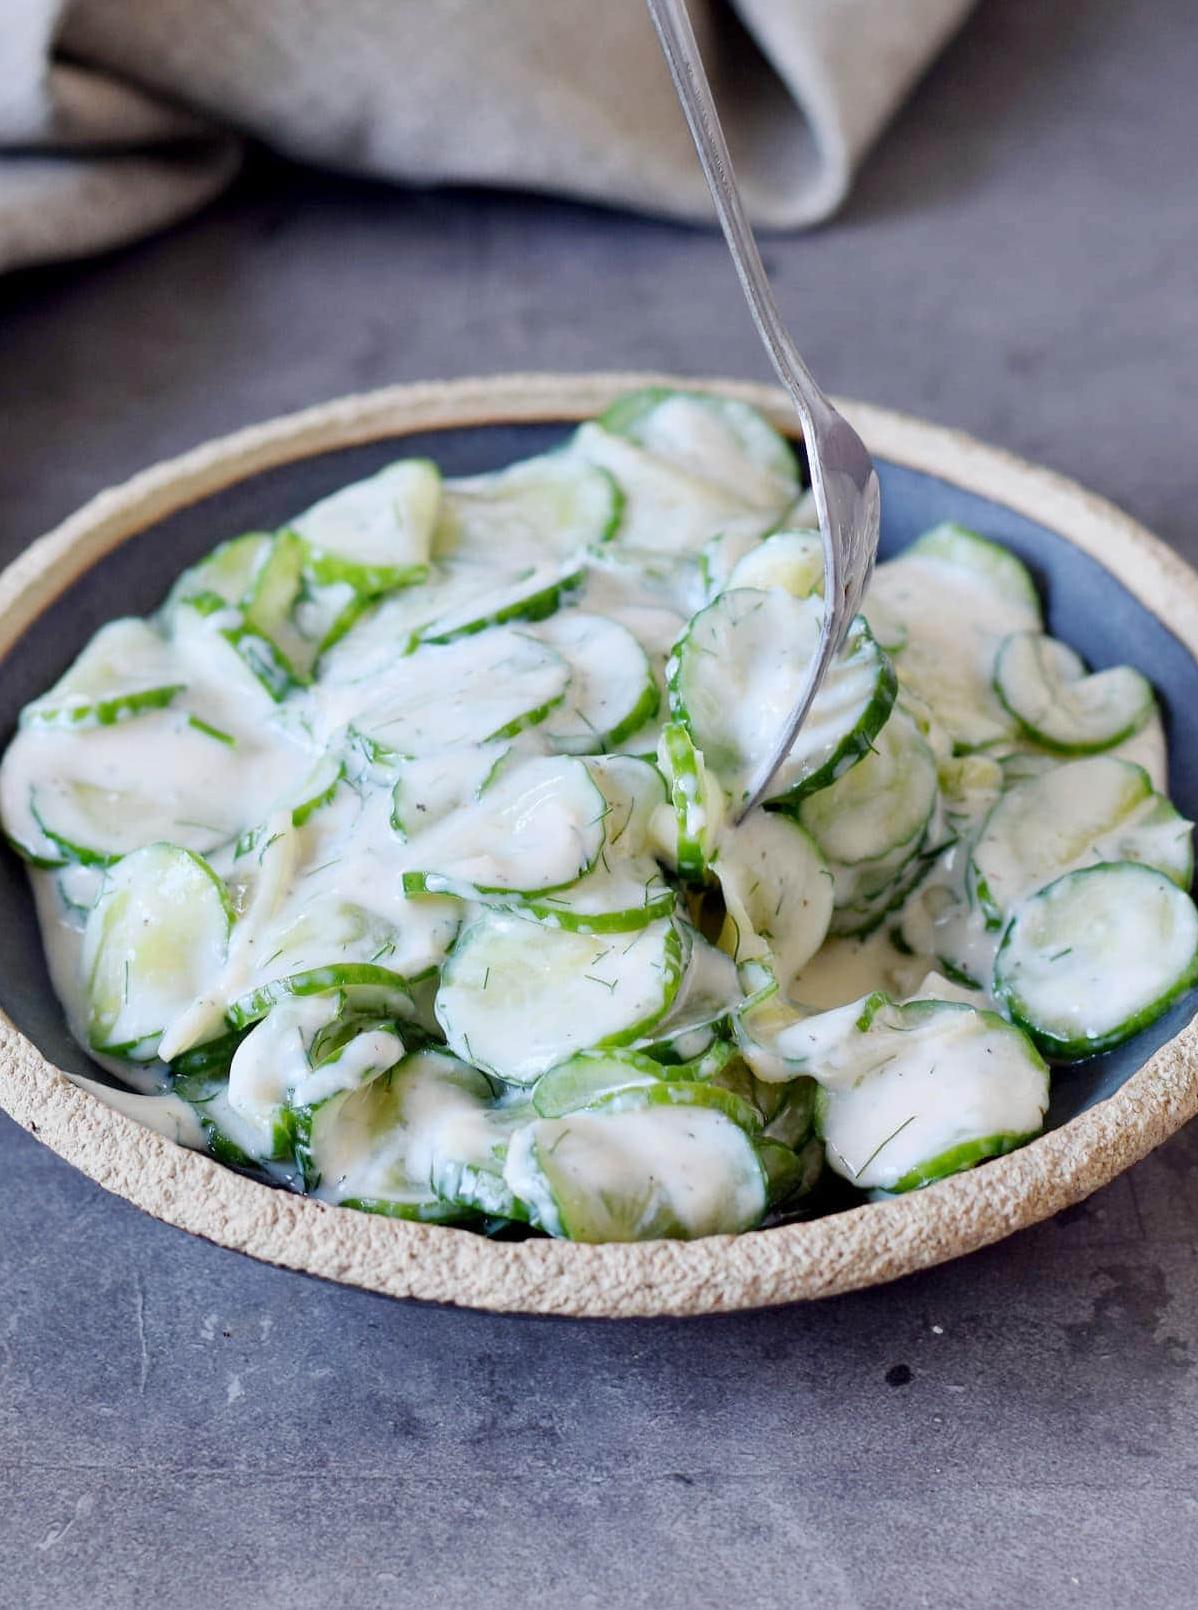  This salad is a great way to use up those fresh cucumbers from your garden or farmer's market.